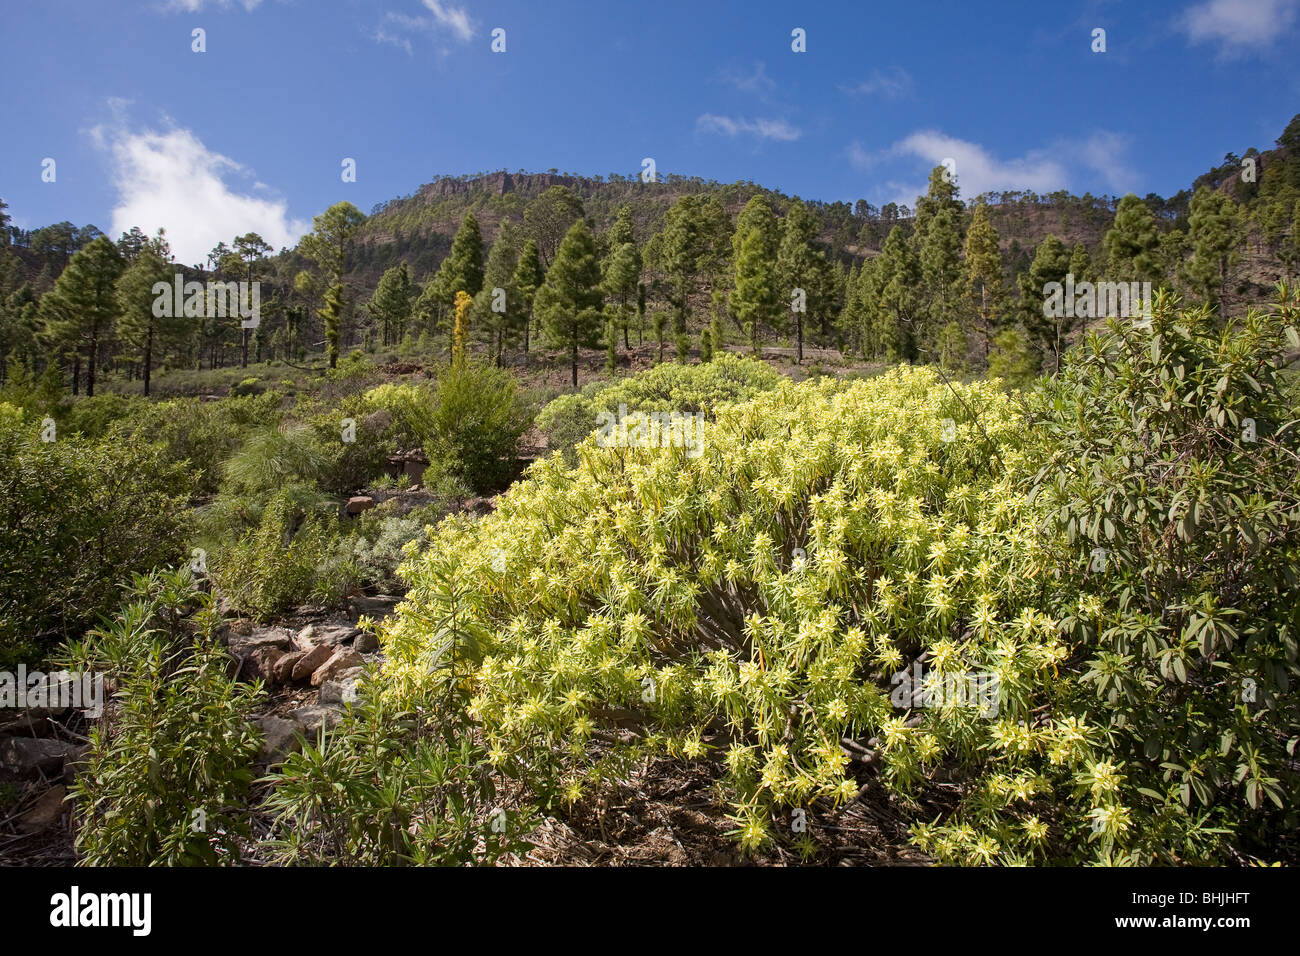 The Inagua forest reserve in the Cumbres or highlands of Gran Canaria. A remote and isolated area that is highly  inaccessible. Stock Photo